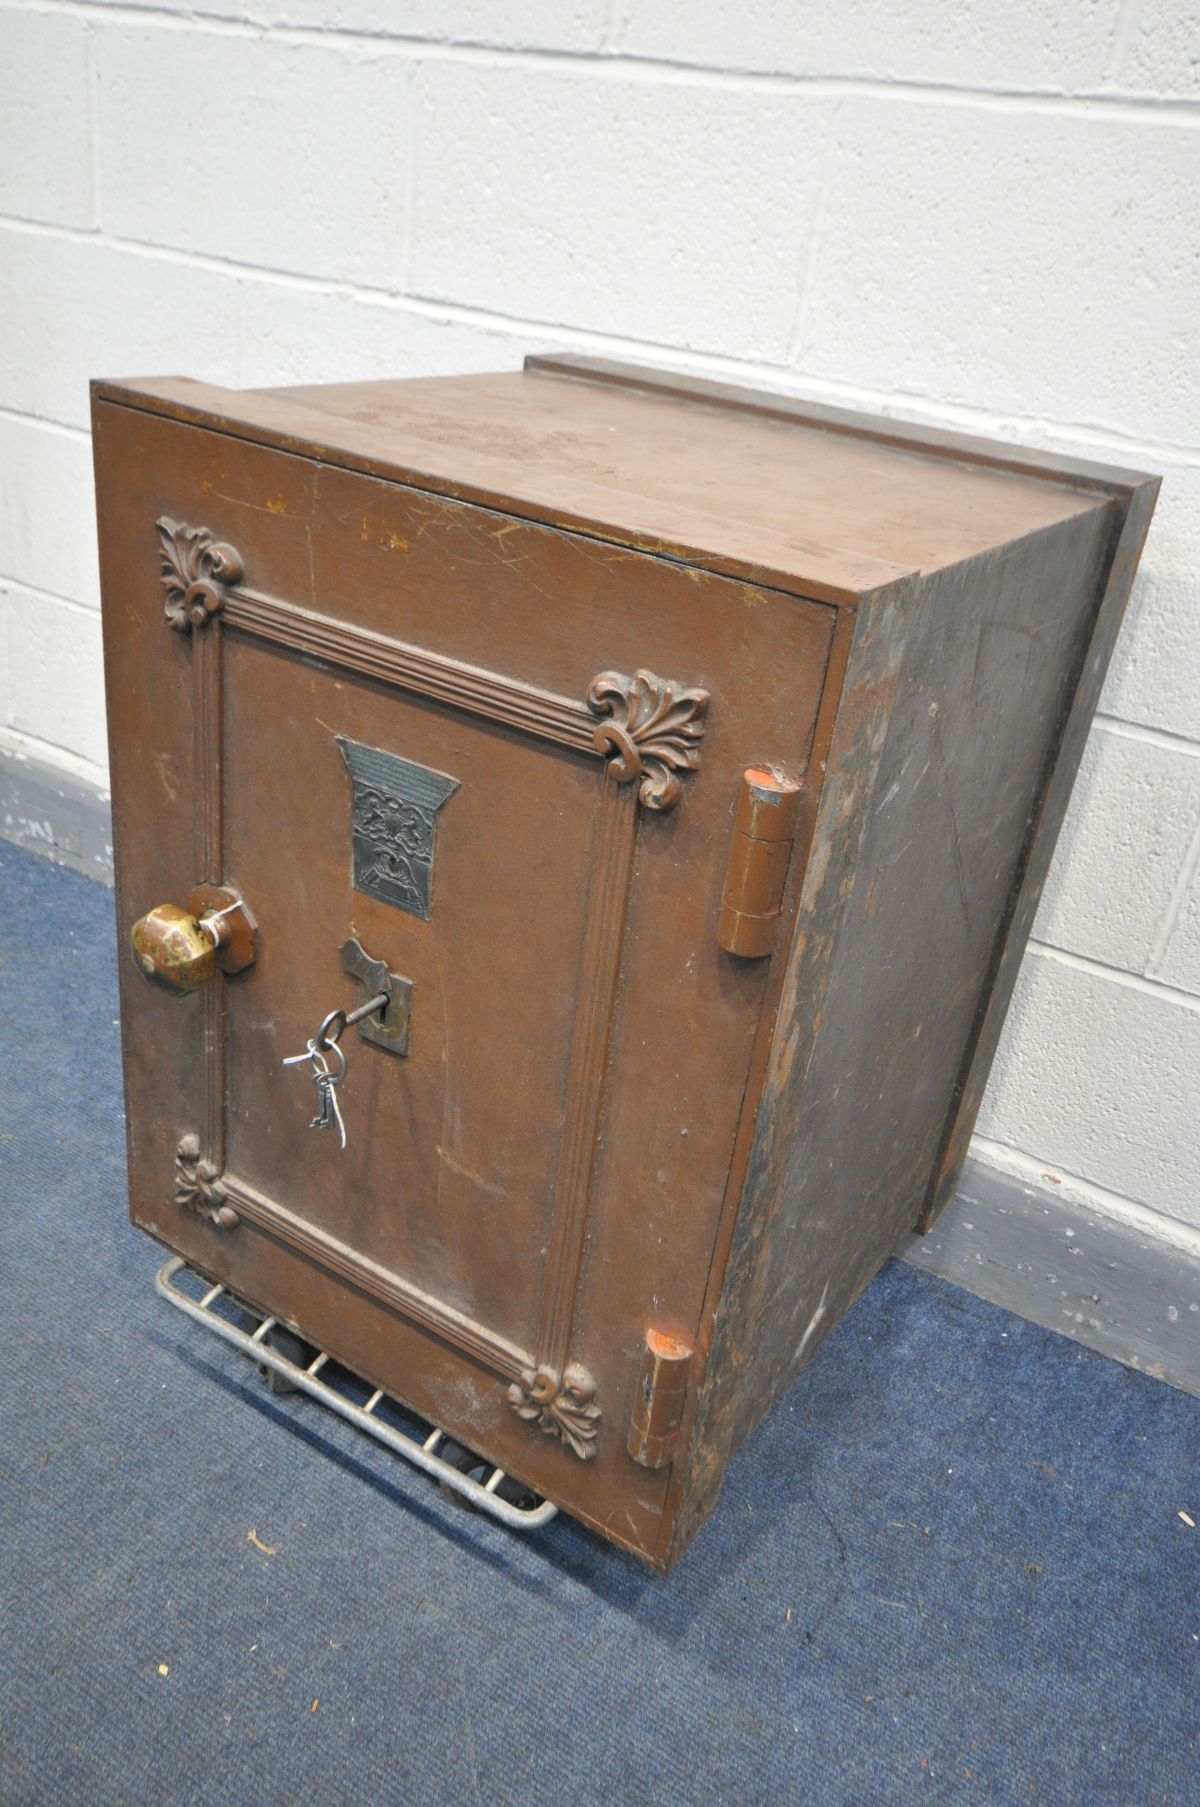 A 19TH CENTURY CAST IRON SAFE, made by Milner's Patent, later partially brown overpainted, brass